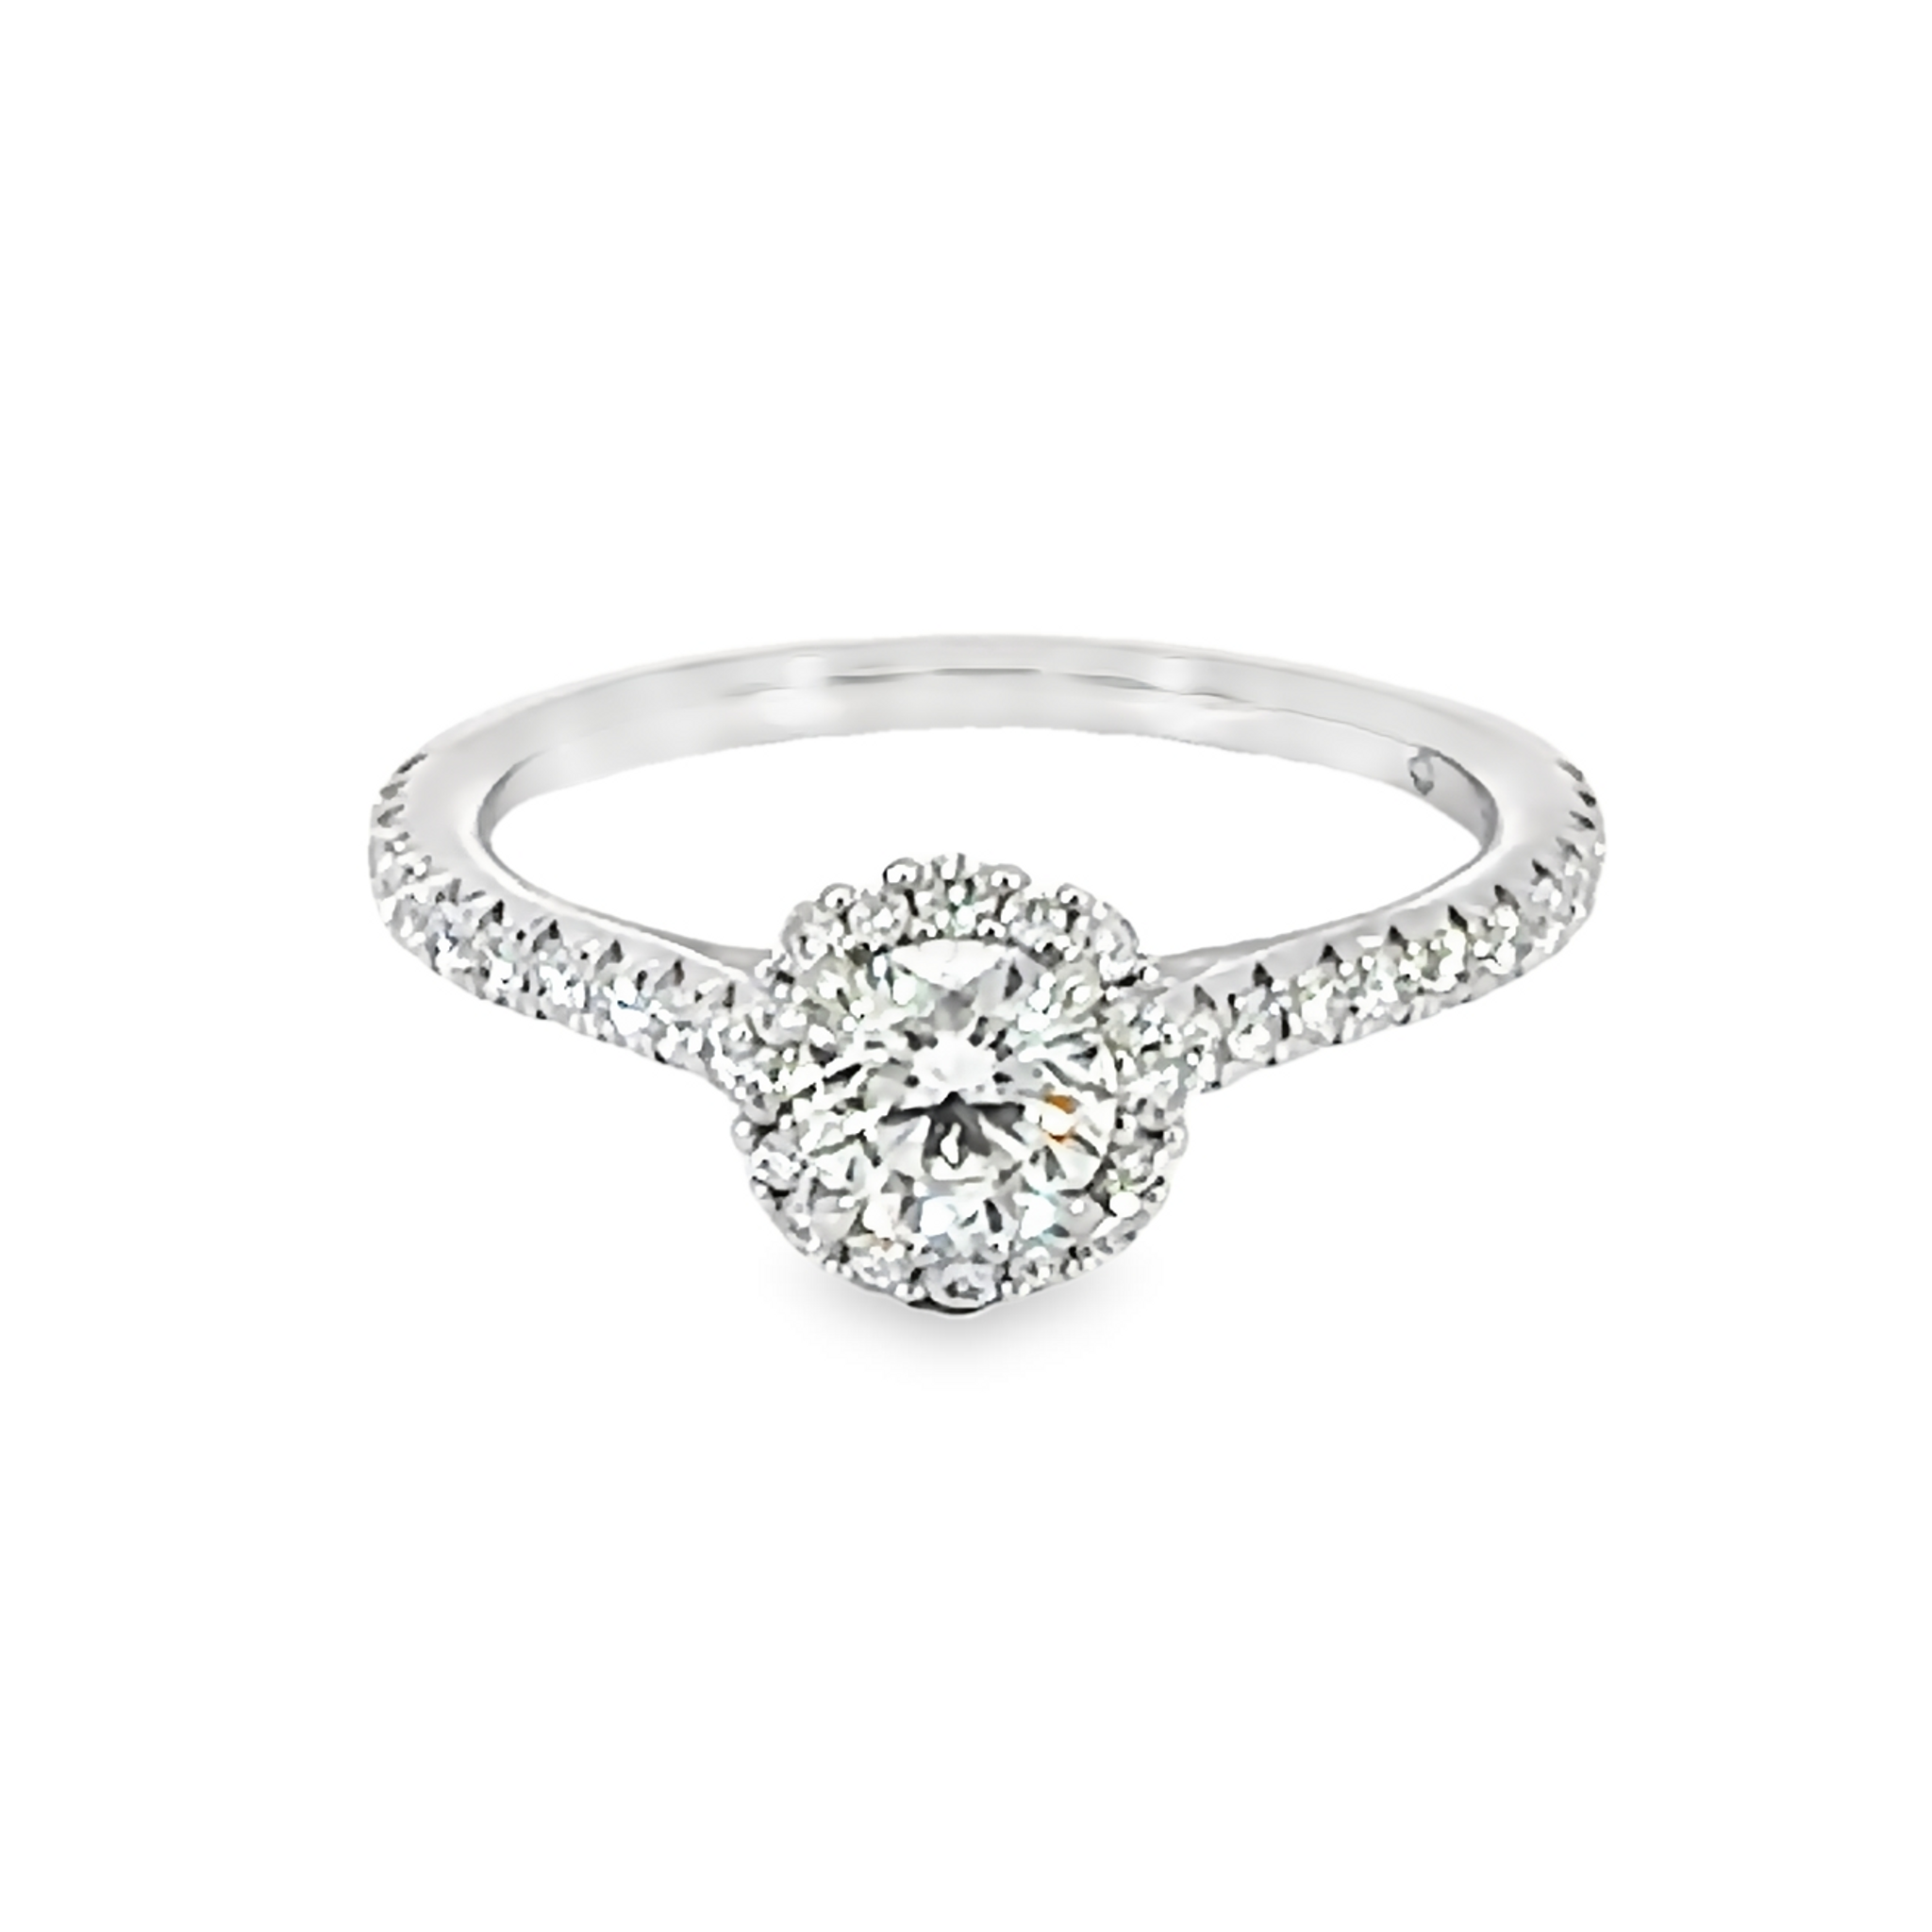 Round Brilliant Diamond Engagement Ring With Halo And Side Accents